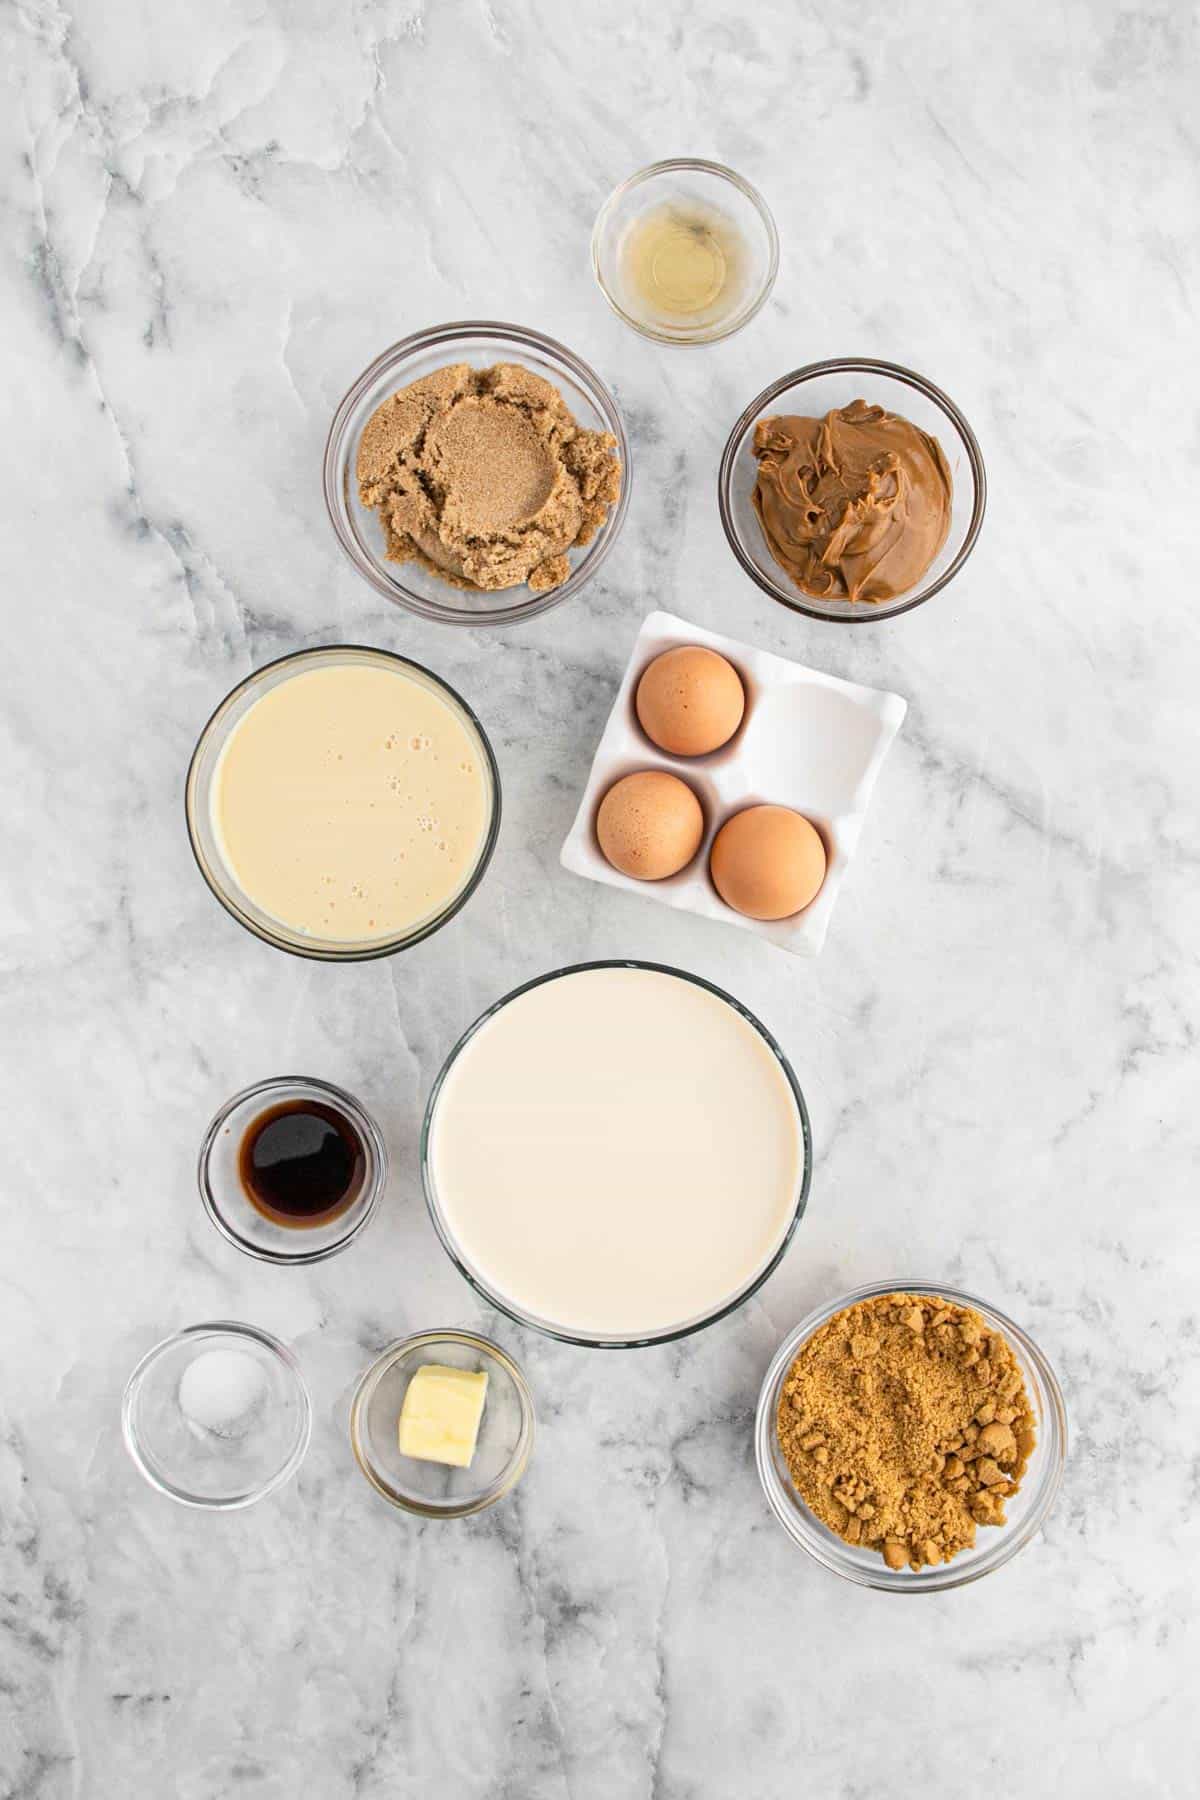 Ingredients to make cookie butter ice cream on the table.